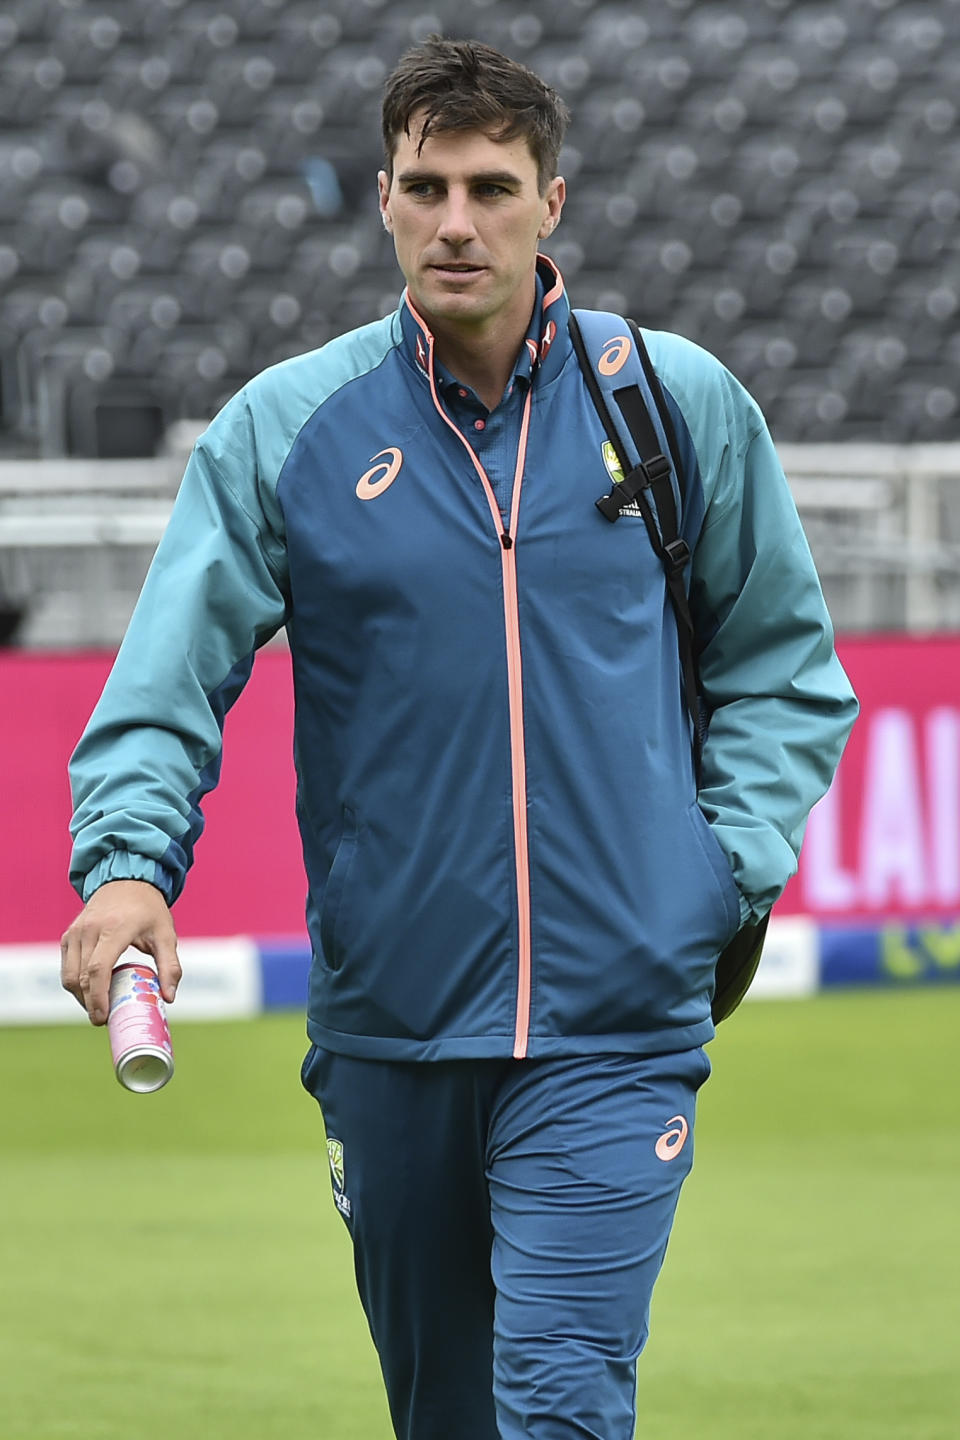 Australia's Pat Cummins arrives for the fifth day of the fourth Ashes Test match between England and Australia at Old Trafford, Manchester, England, Sunday, July 23, 2023. (AP Photo/Rui Vieira)